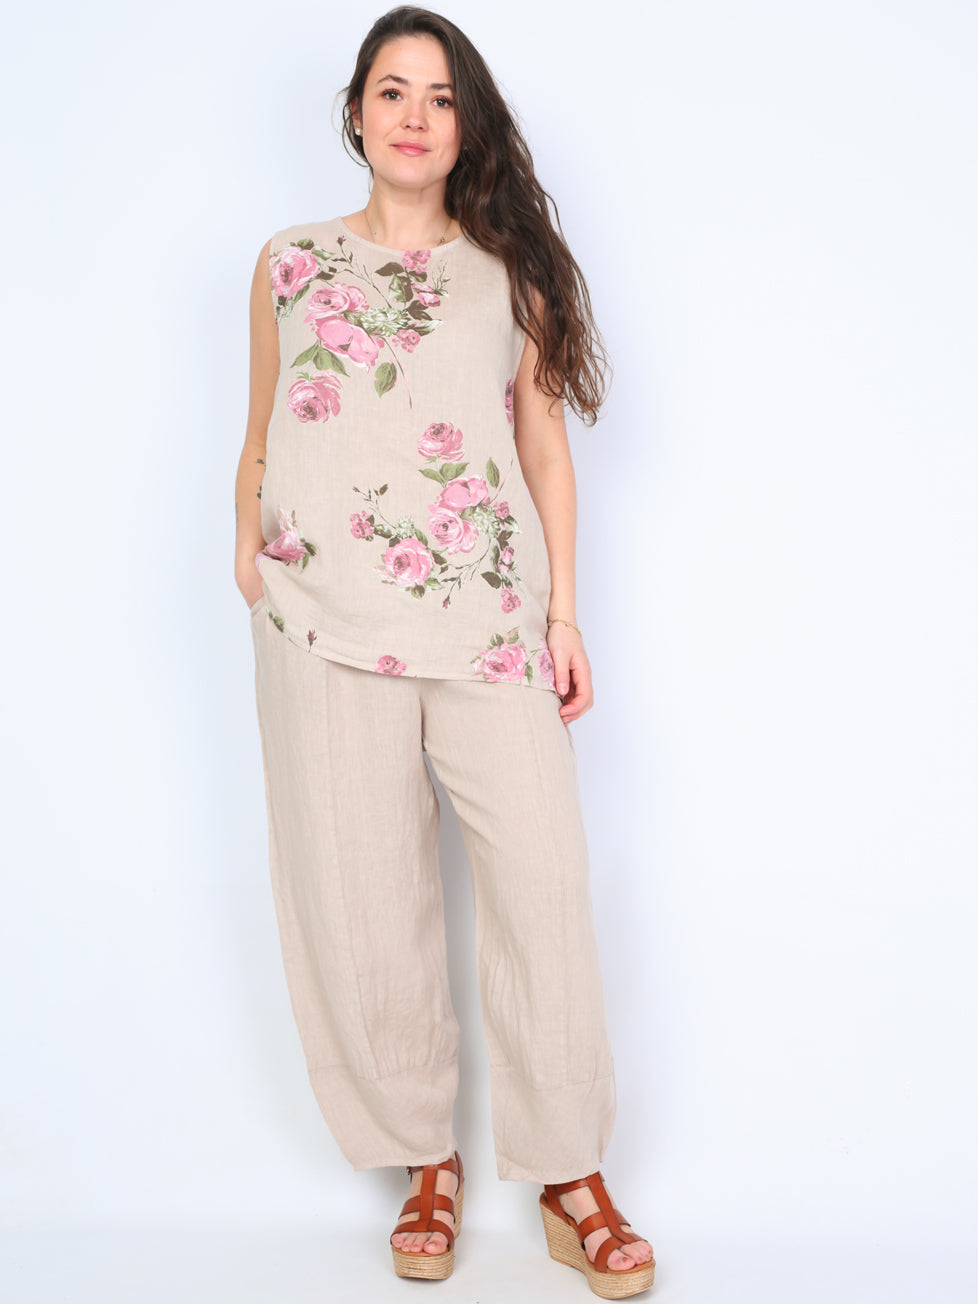 Krone 1 linen top with floral print